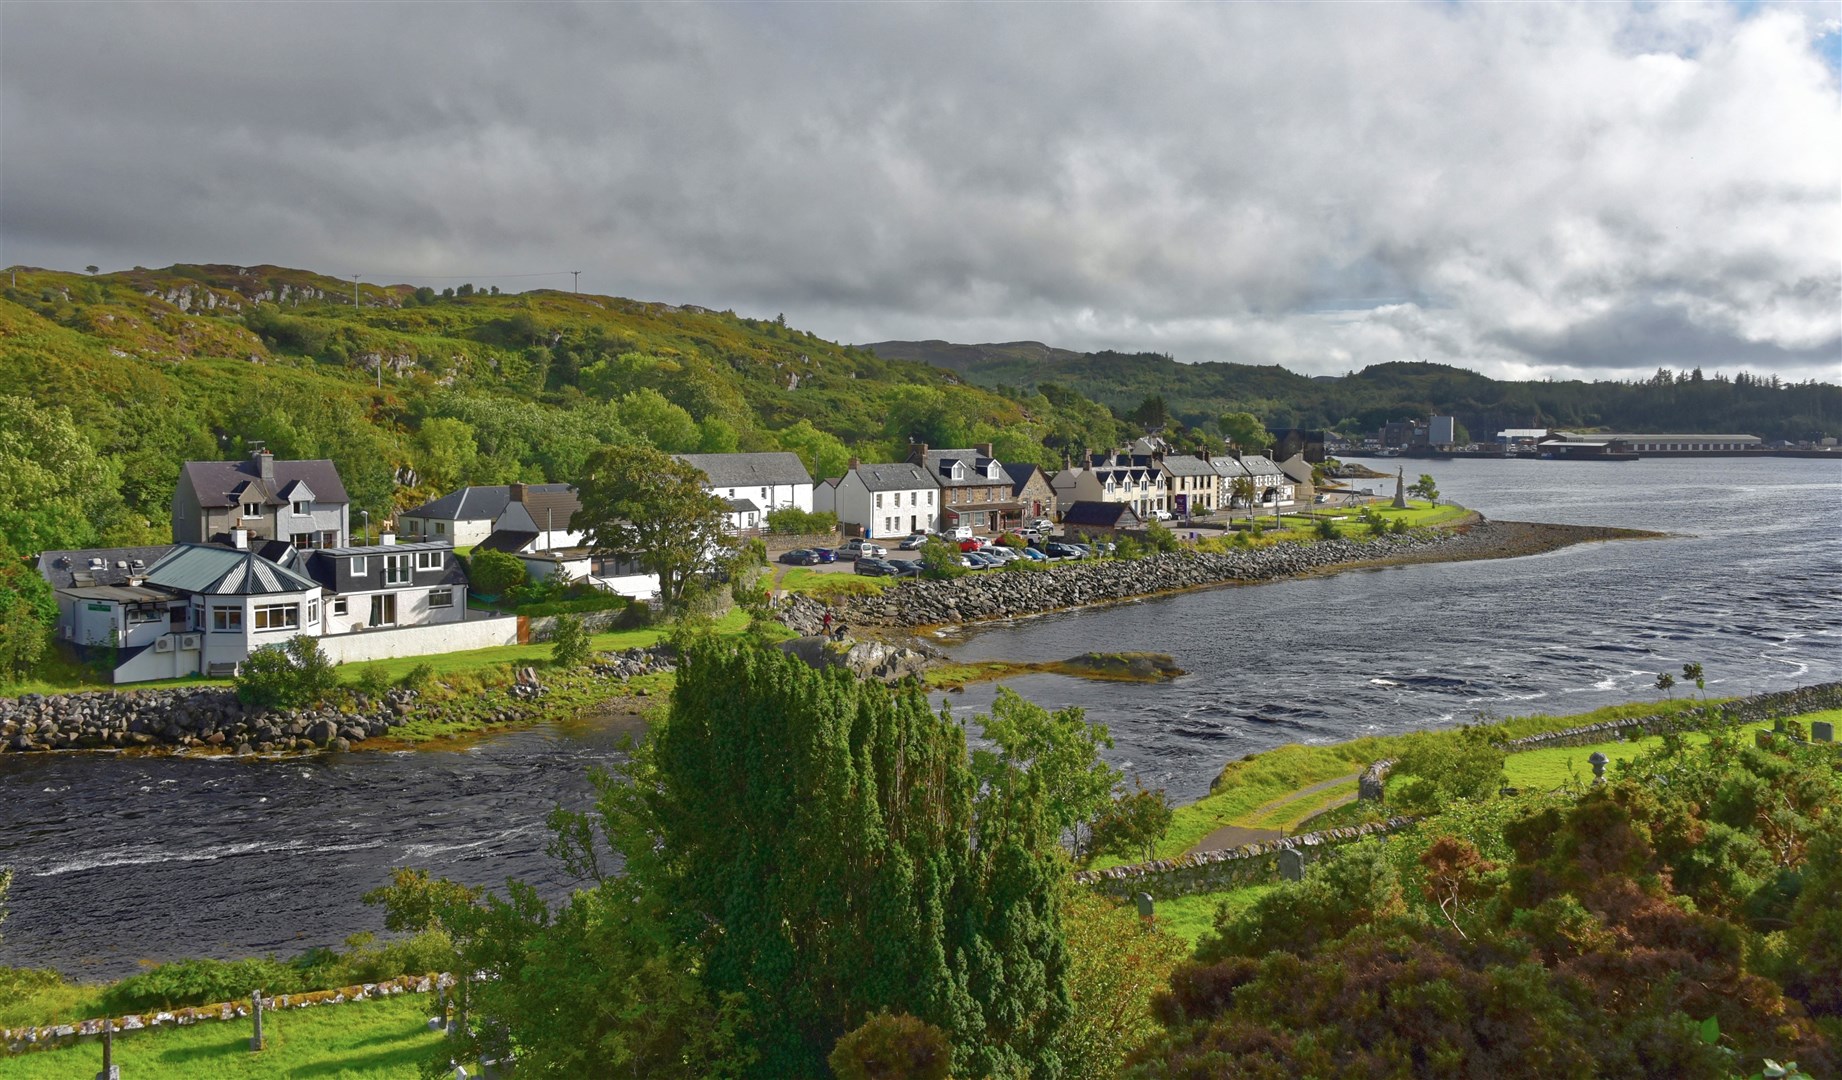 Iona will be serving communities around the north-west Highlands, including Lochinver.